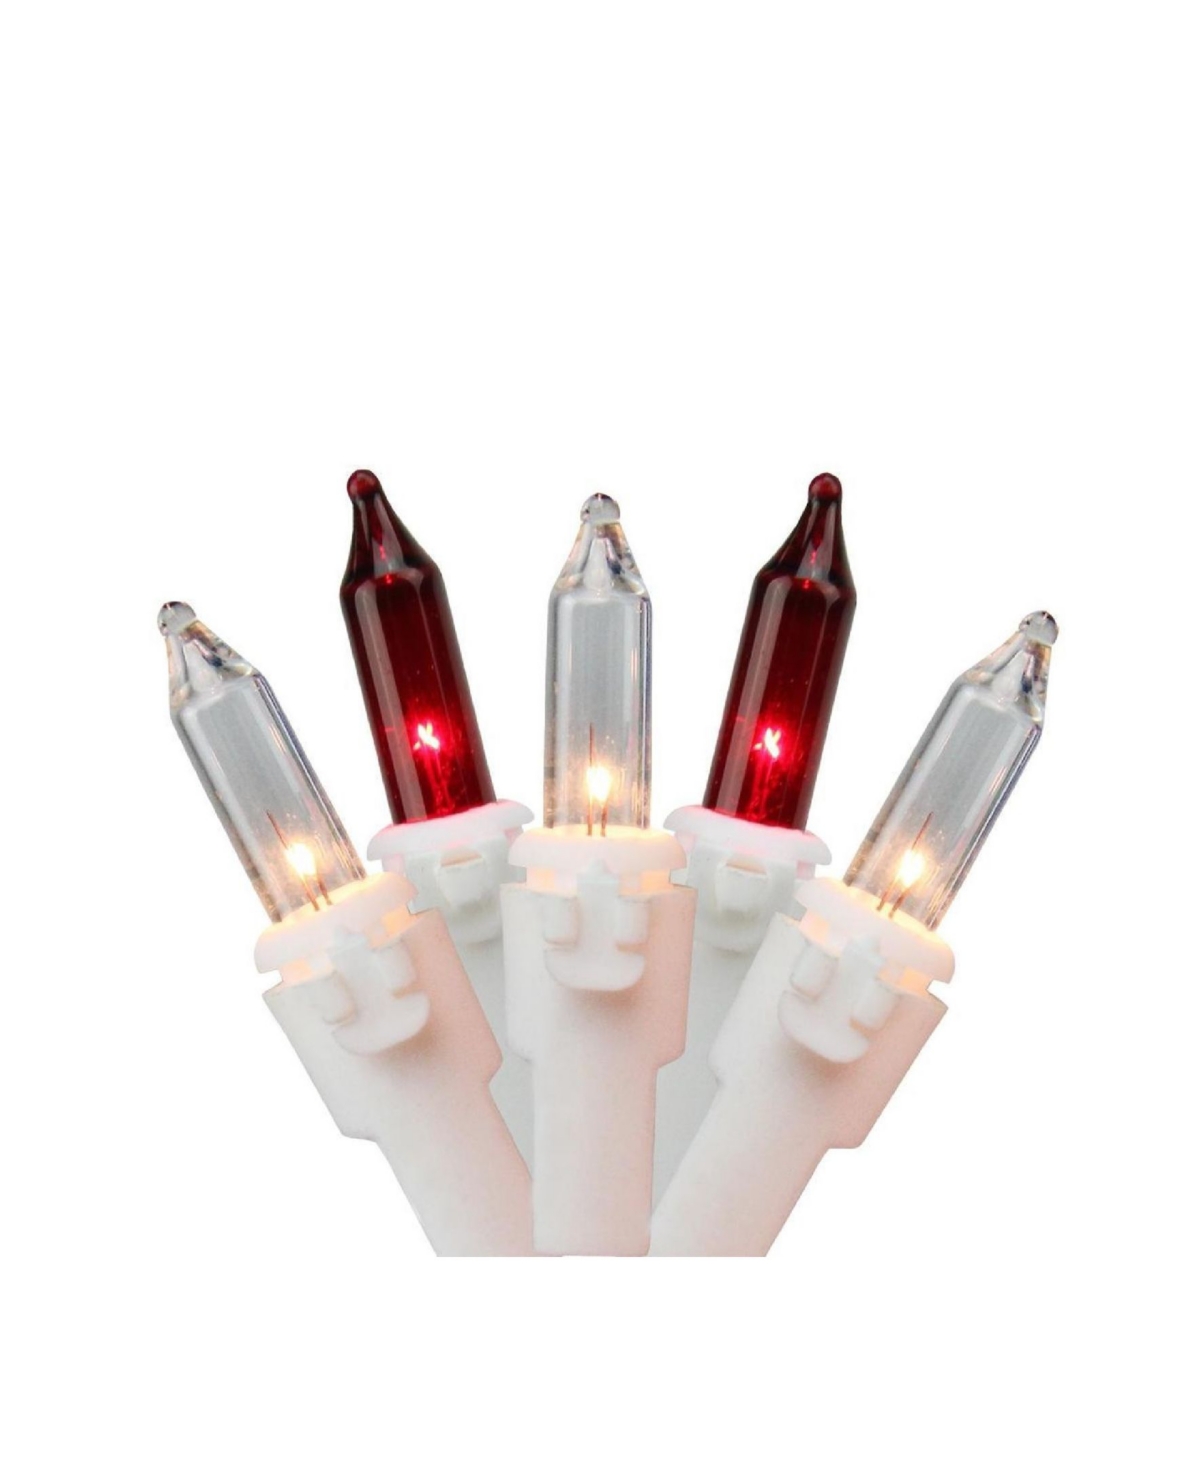 Northlight Set Of 100 Red And Clear Mini Icicle Christmas Lights 3" Spacing